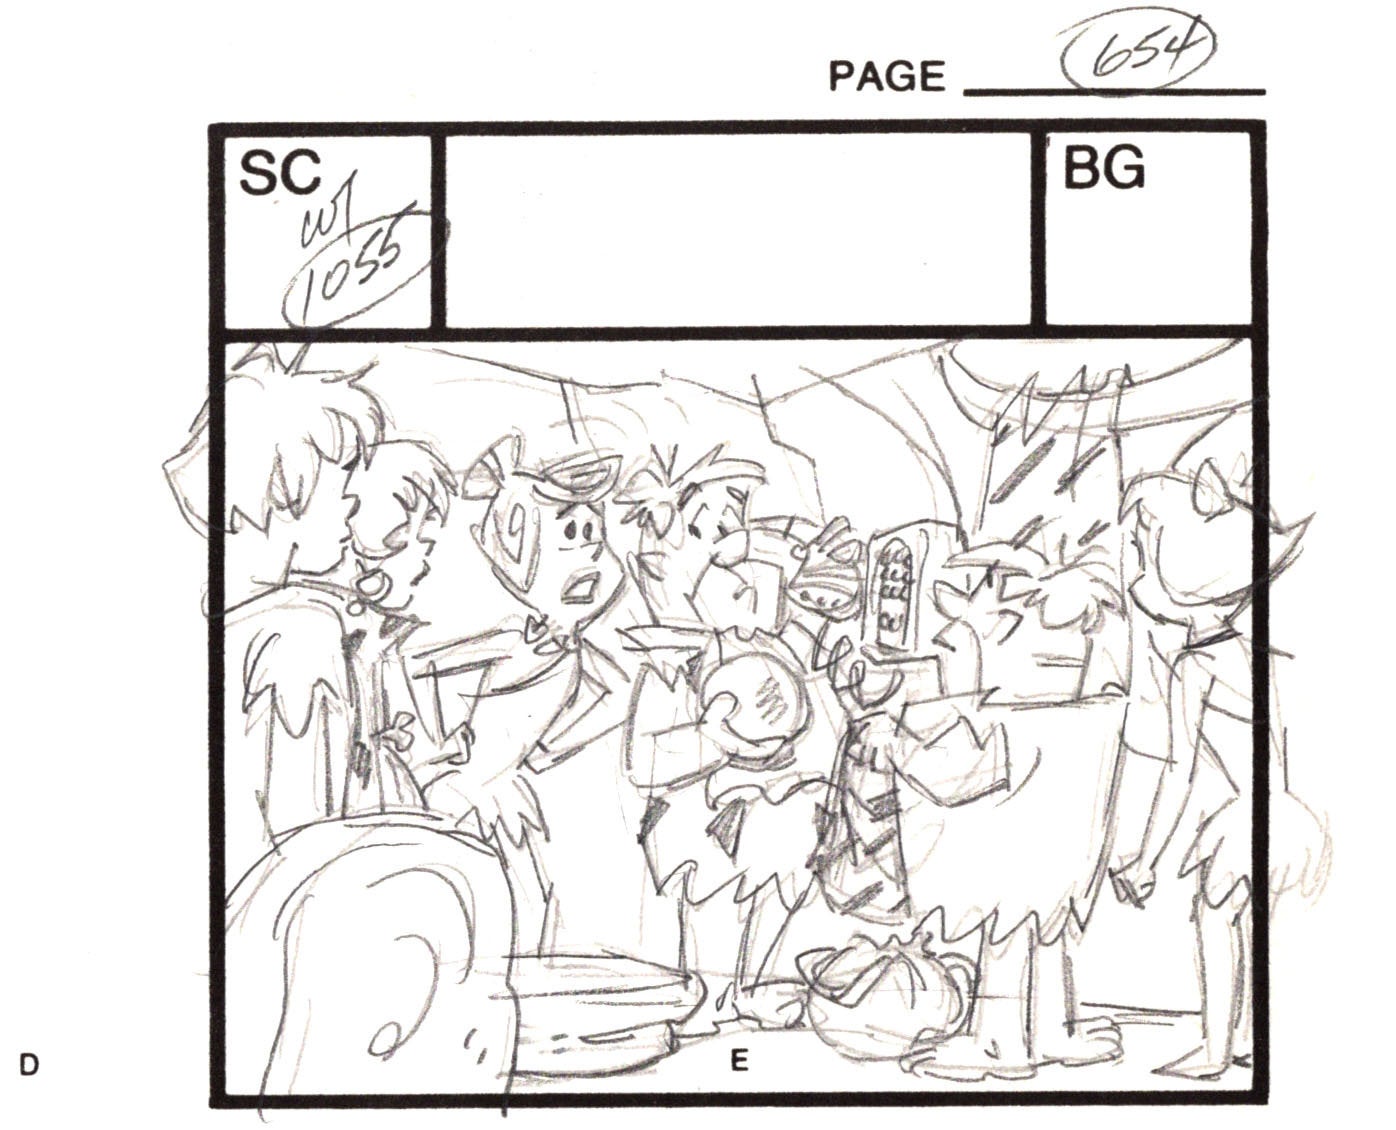 3 LOT of Flintstones Hollyrock-a-Bye Baby Animation Storyboards BOWLING from Hanna Barbera Signed by Bob Singer 1993